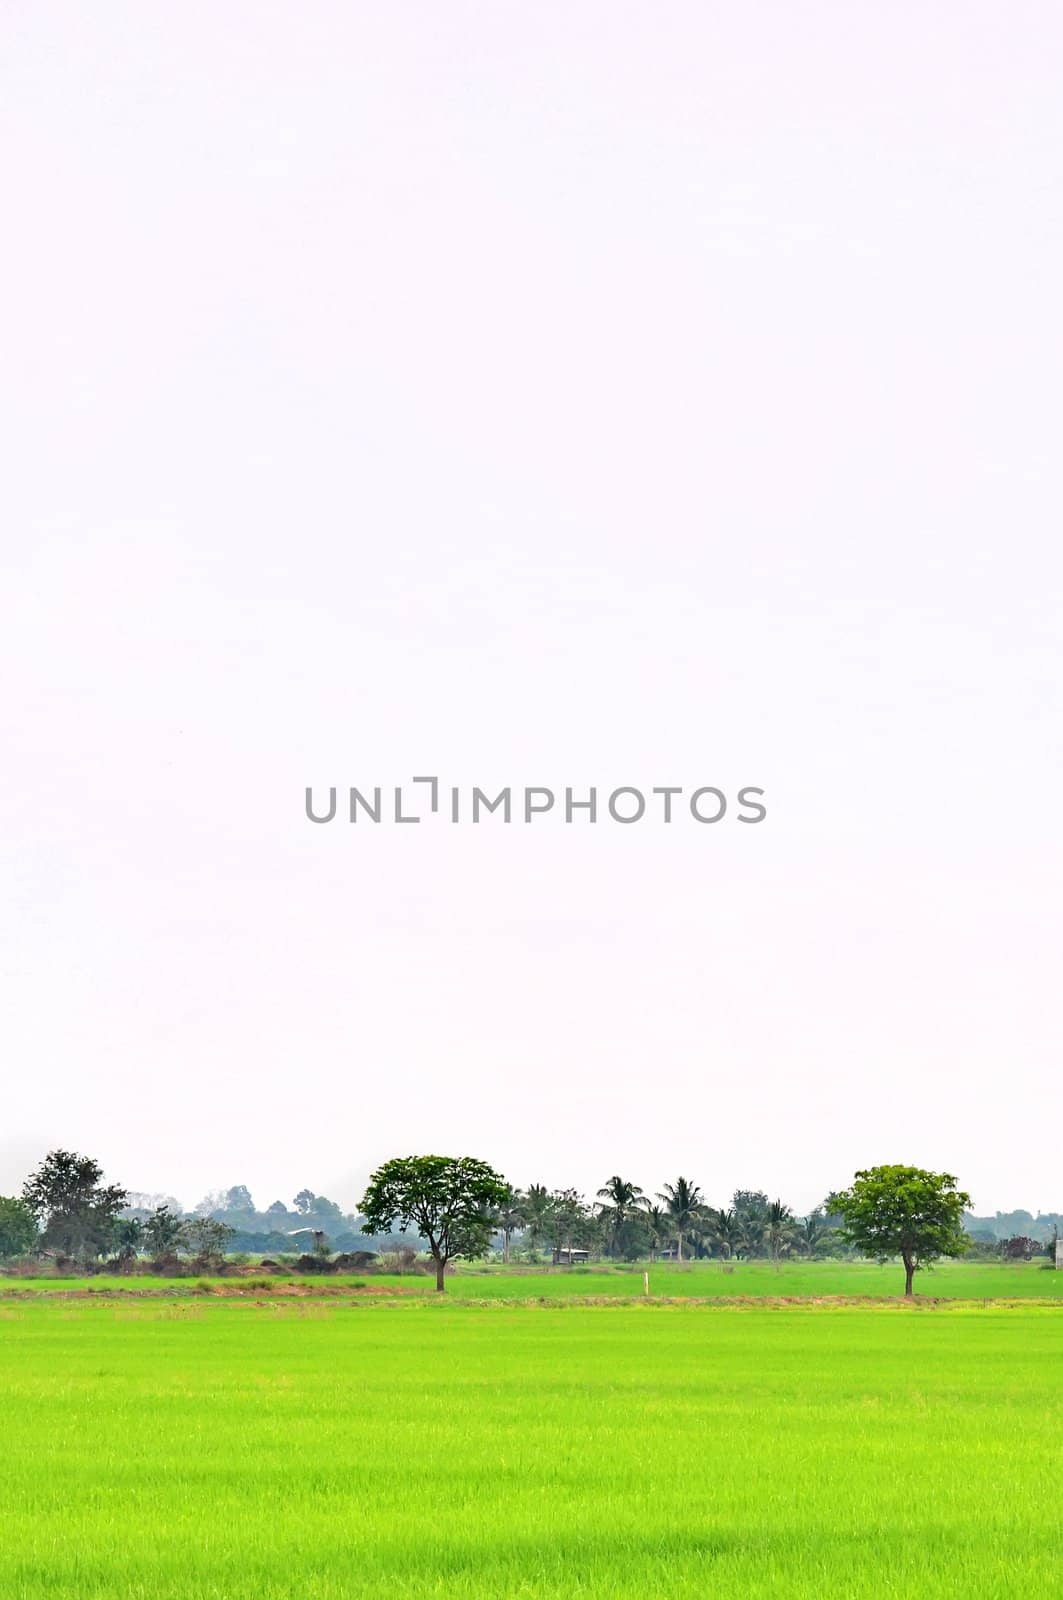 Trees in rice fields. The sky is bright